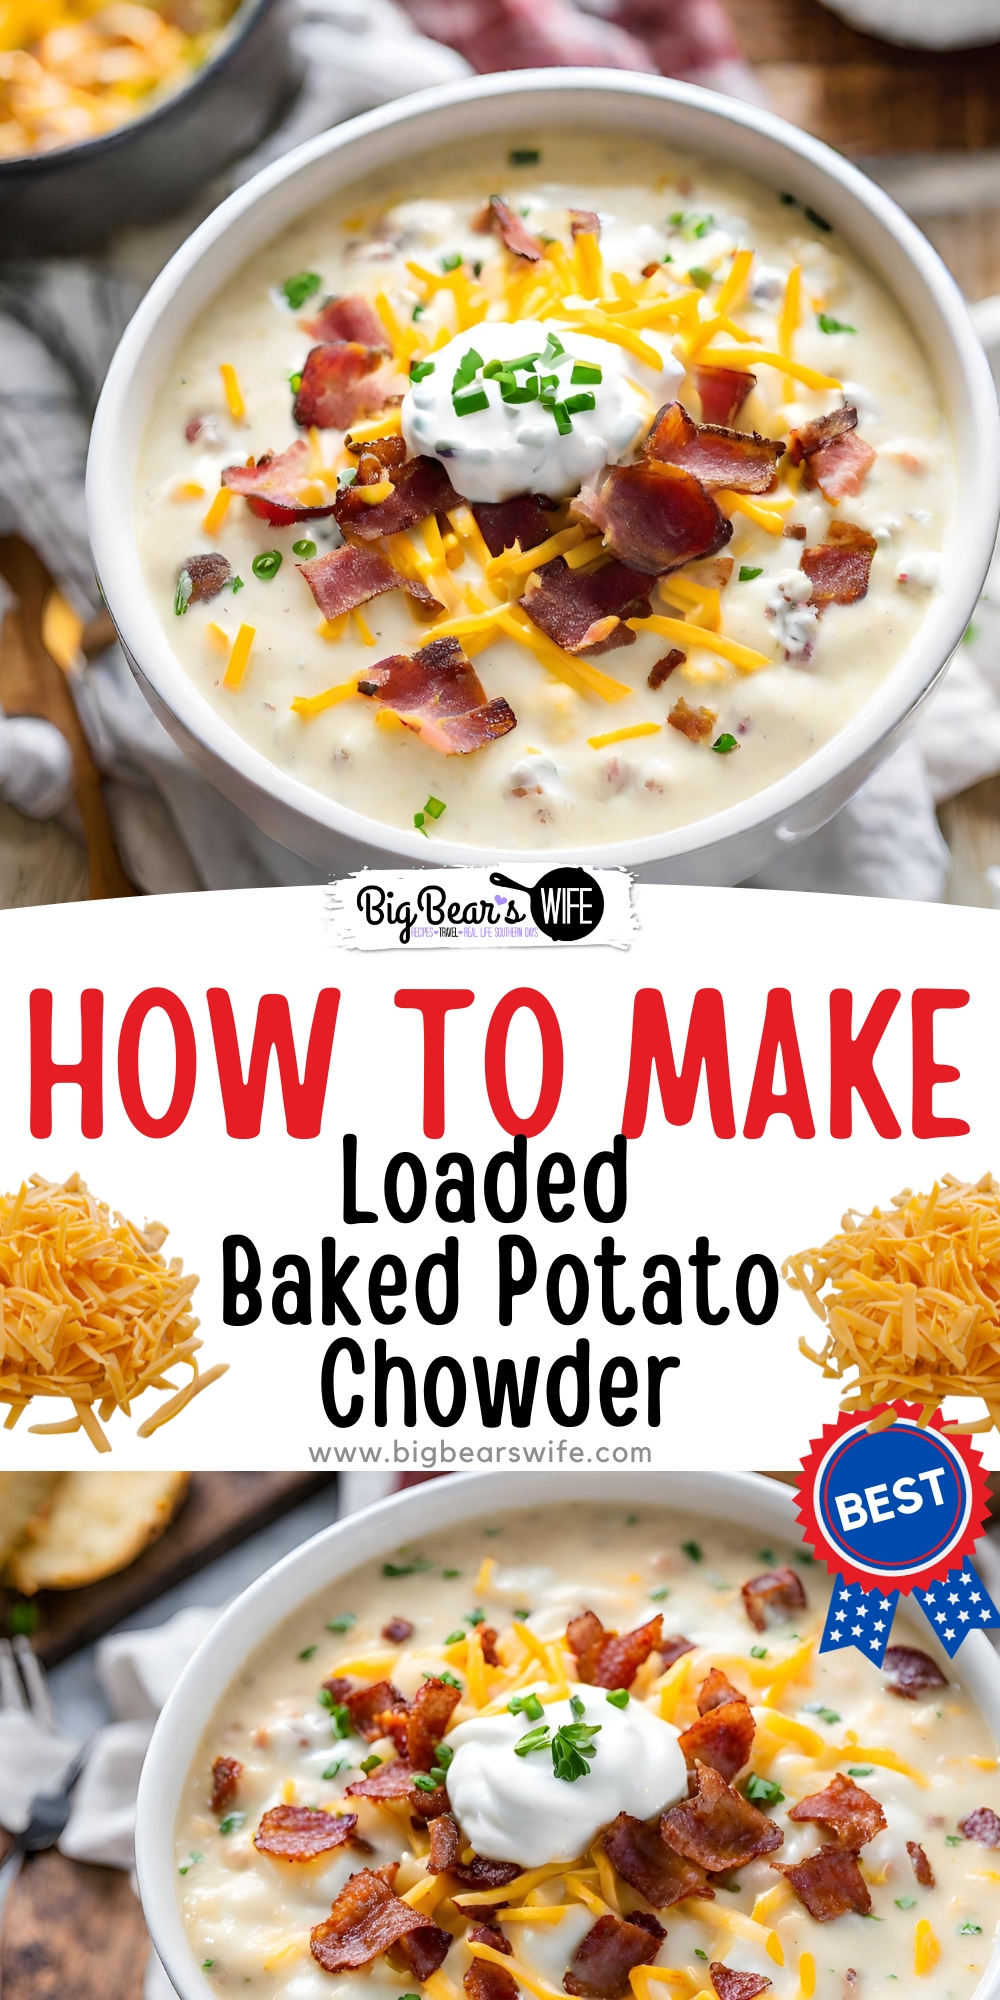 Warm up with a big bowl of this easy homemade Loaded Baked Potato Chowder! This recipe is sure to become a family favorite!  via @bigbearswife